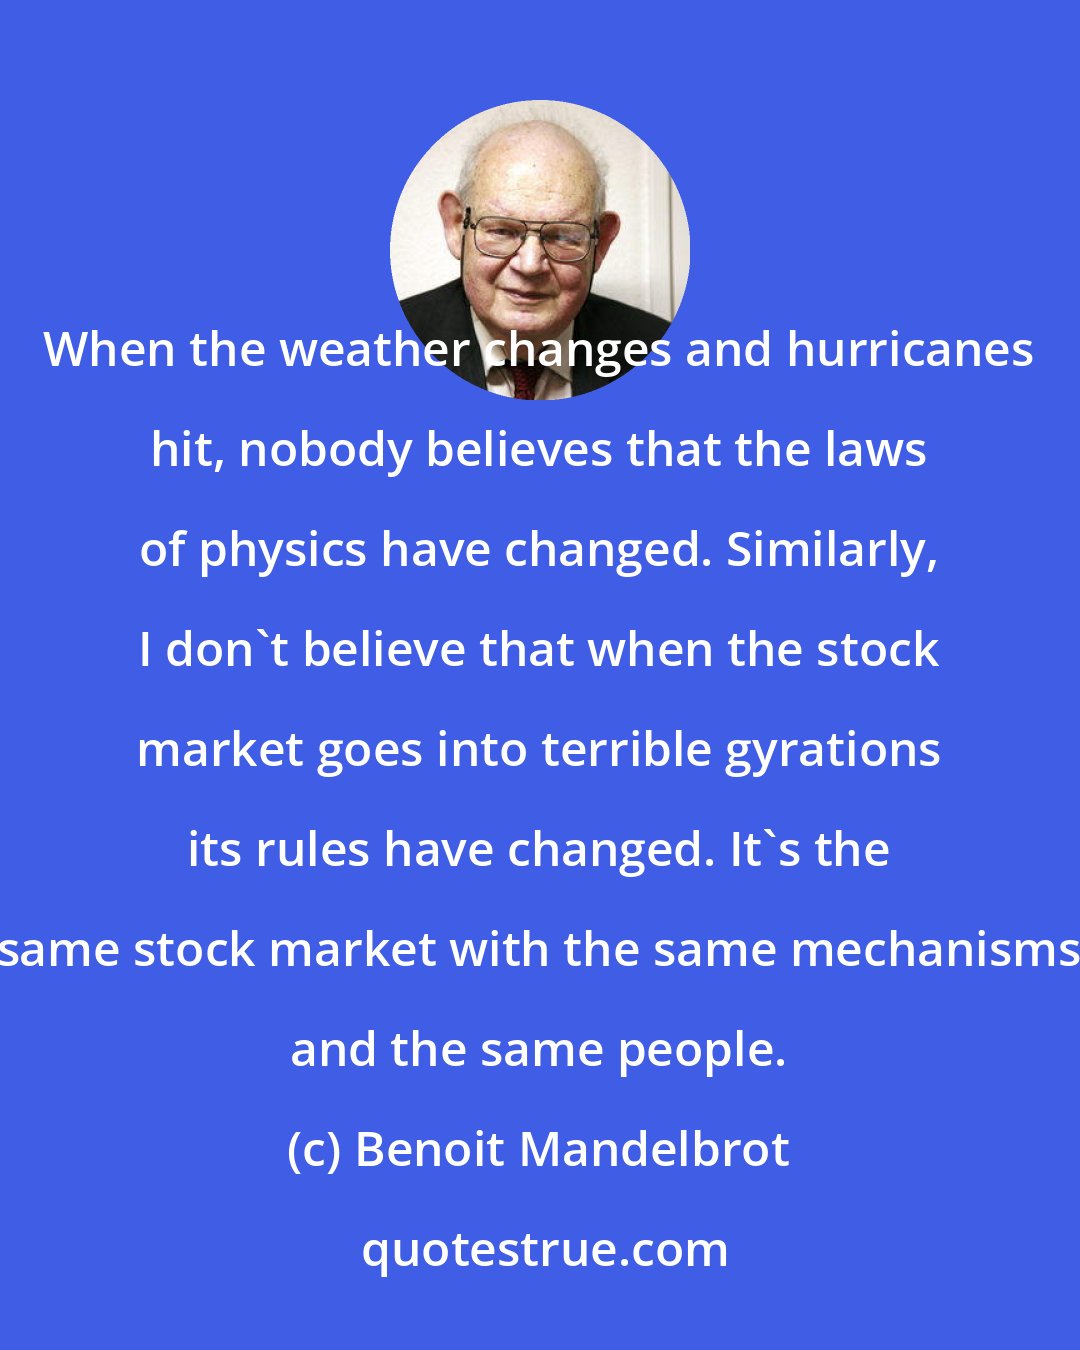 Benoit Mandelbrot: When the weather changes and hurricanes hit, nobody believes that the laws of physics have changed. Similarly, I don't believe that when the stock market goes into terrible gyrations its rules have changed. It's the same stock market with the same mechanisms and the same people.